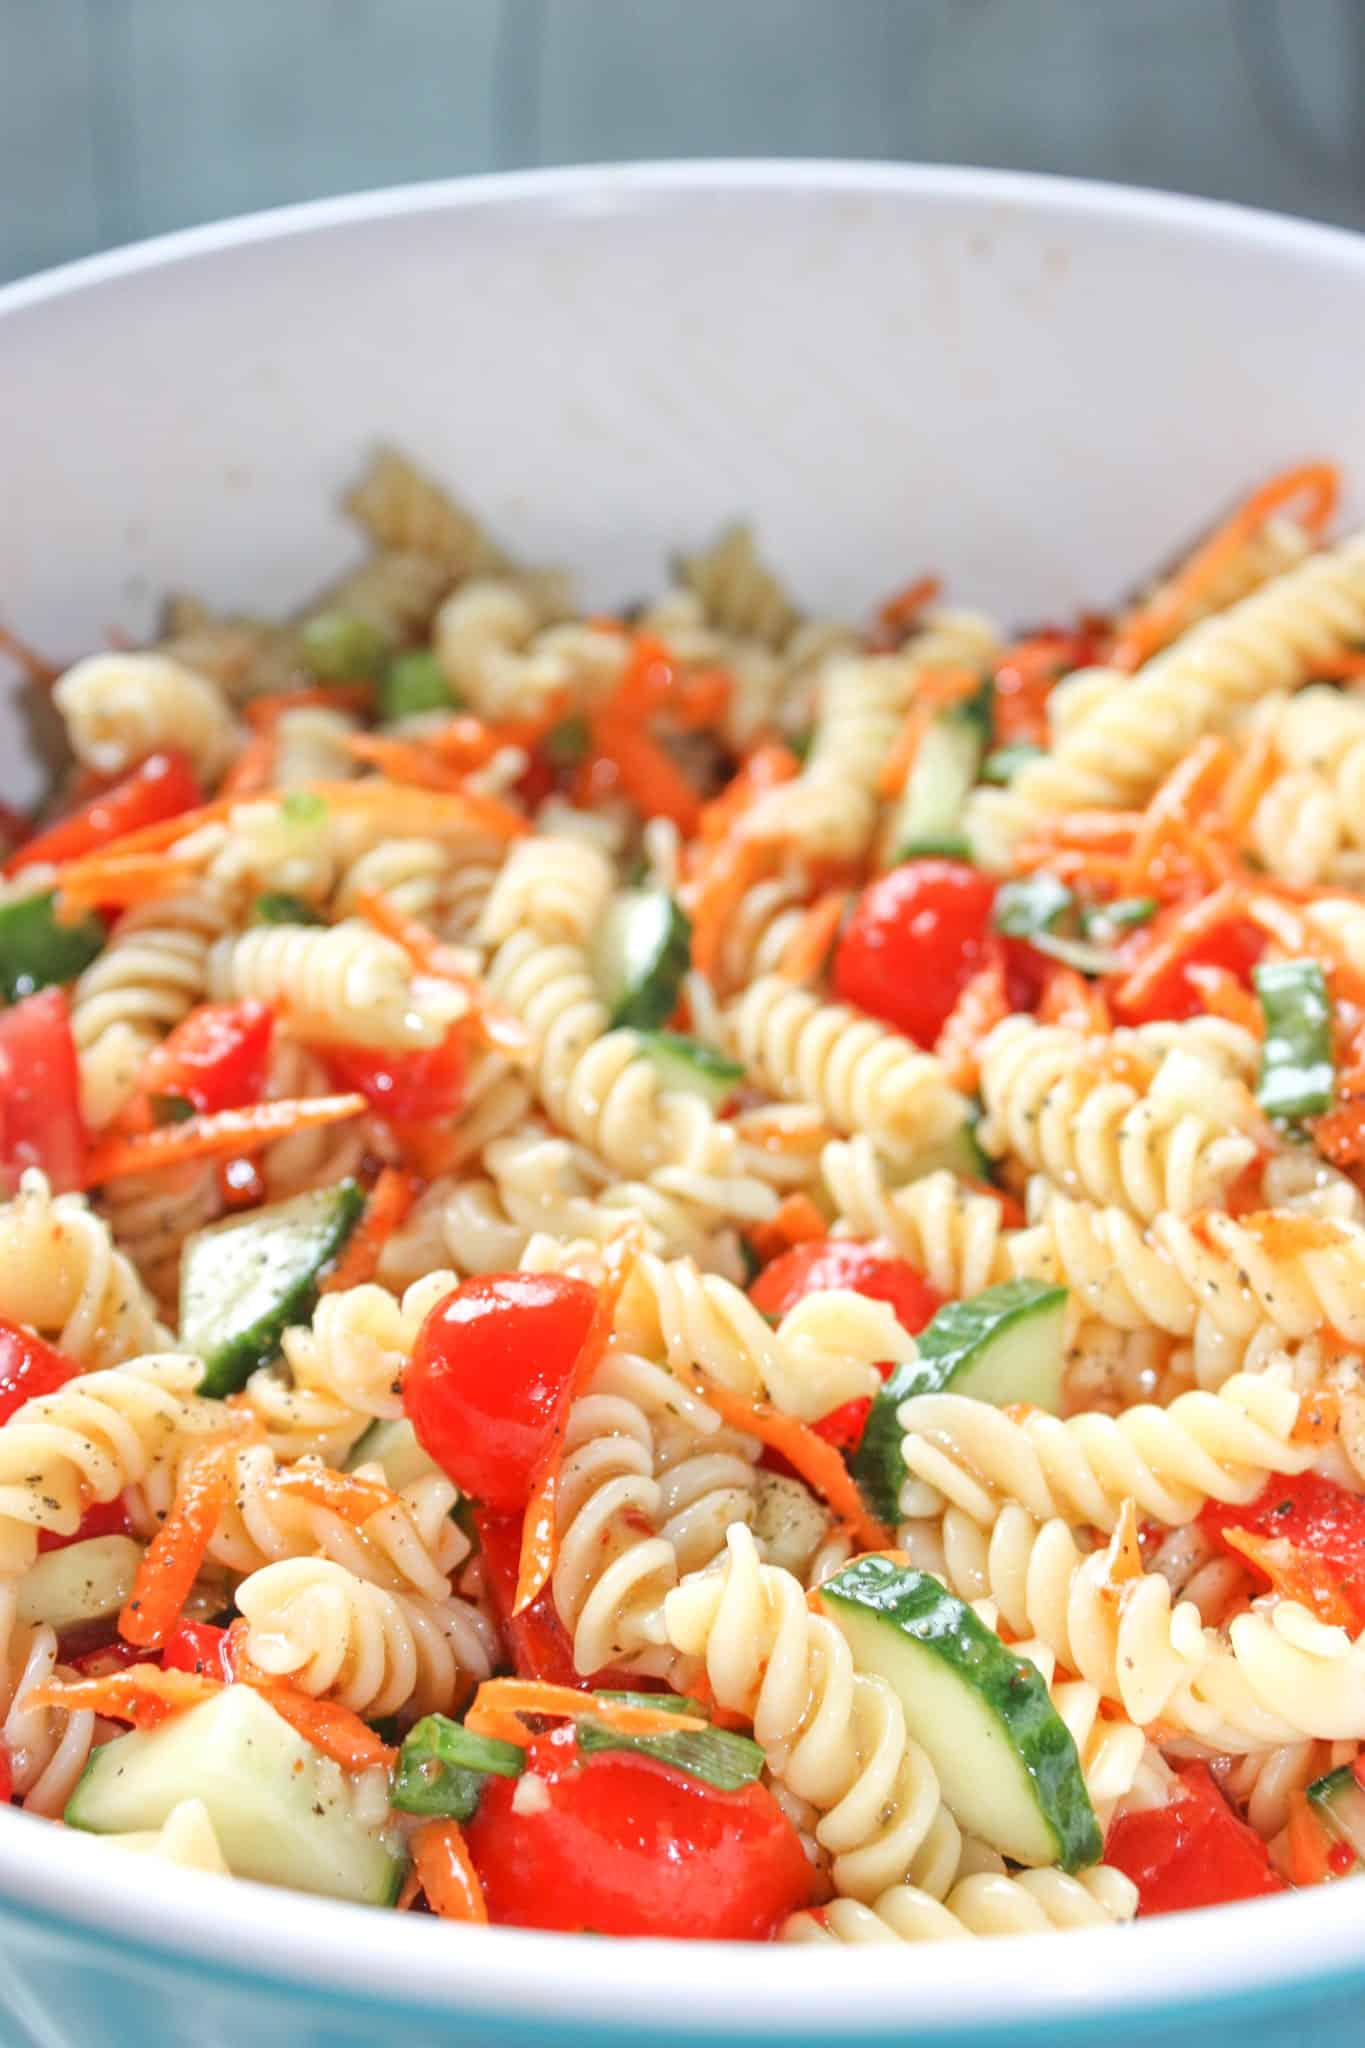 Easy Pasta Salad is a tasty cold side dish recipe loaded with chopped vegetables and tossed in Zesty Italian dressing. This gluten free pasta salad is a quick and easy recipe that even those that can consume gluten will enjoy!